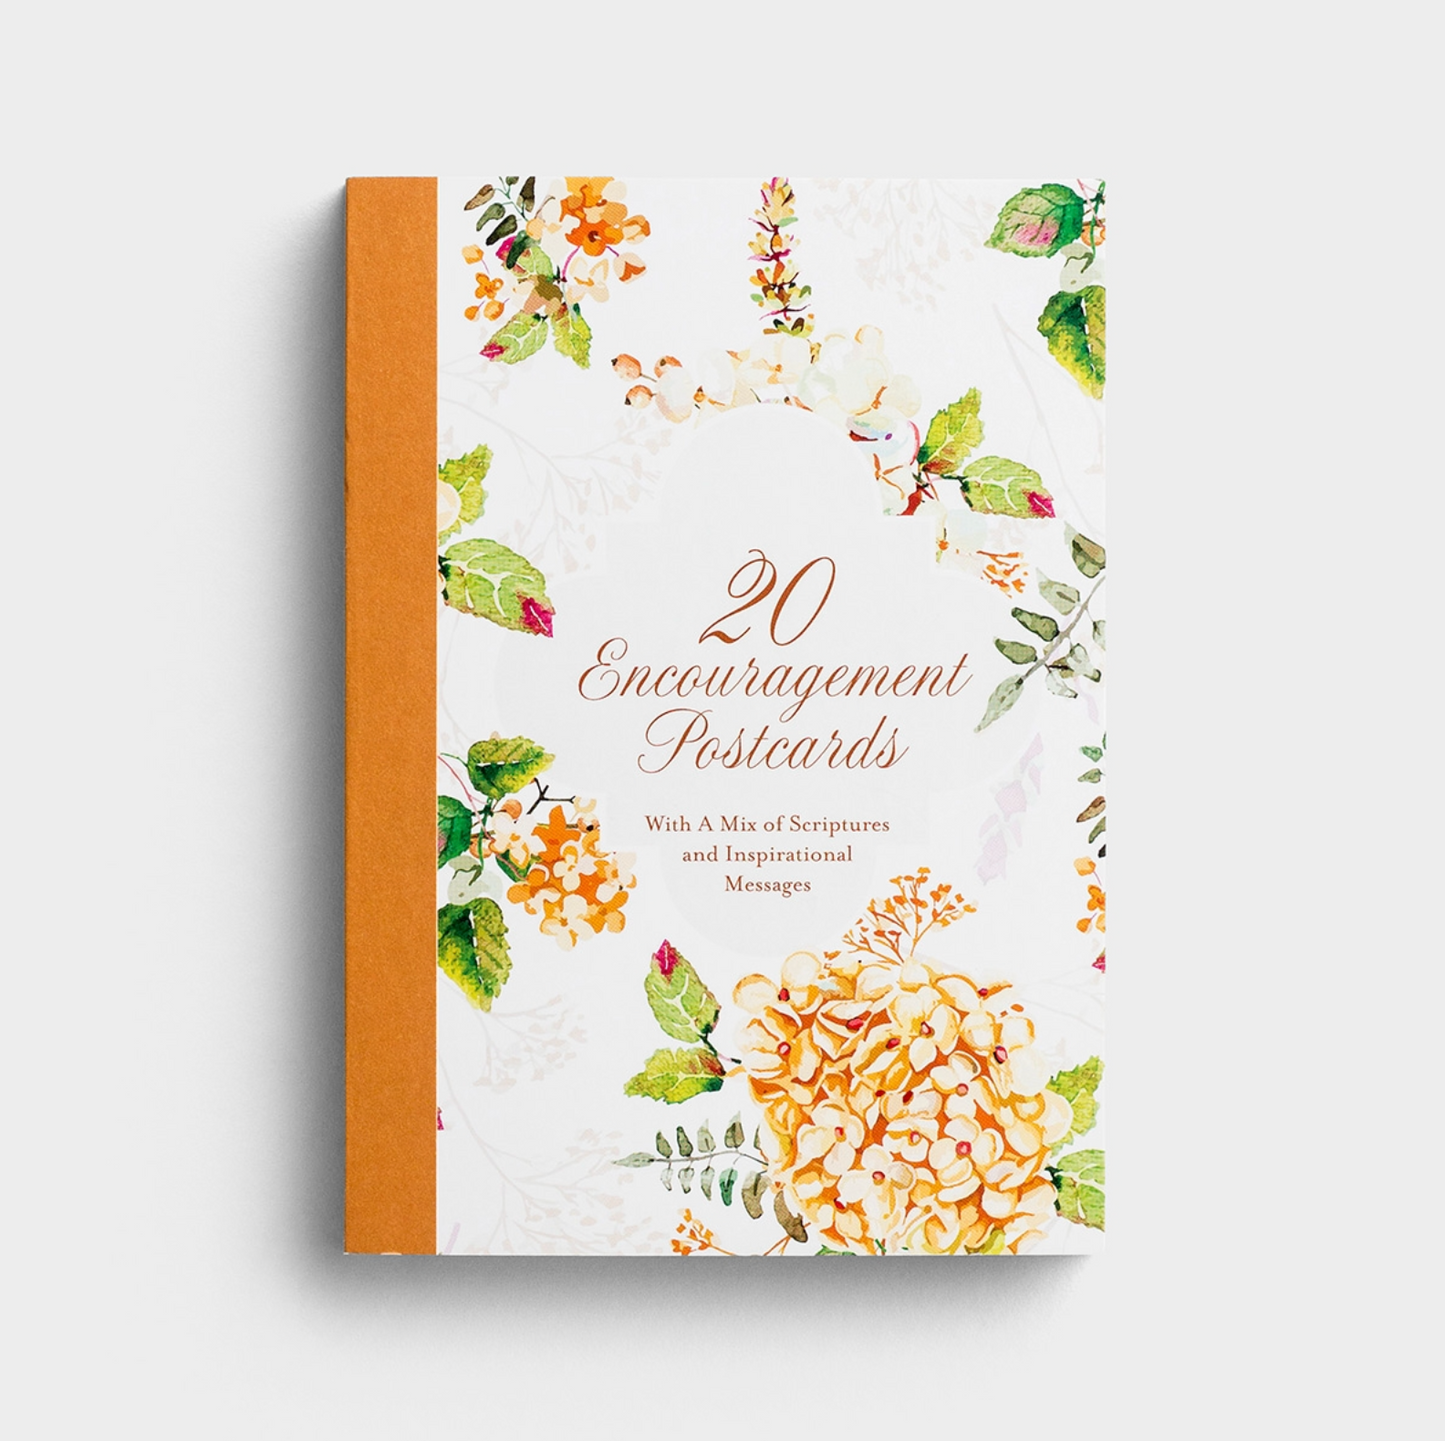 The Beauty of His Word - 20 Encouragement Postcards